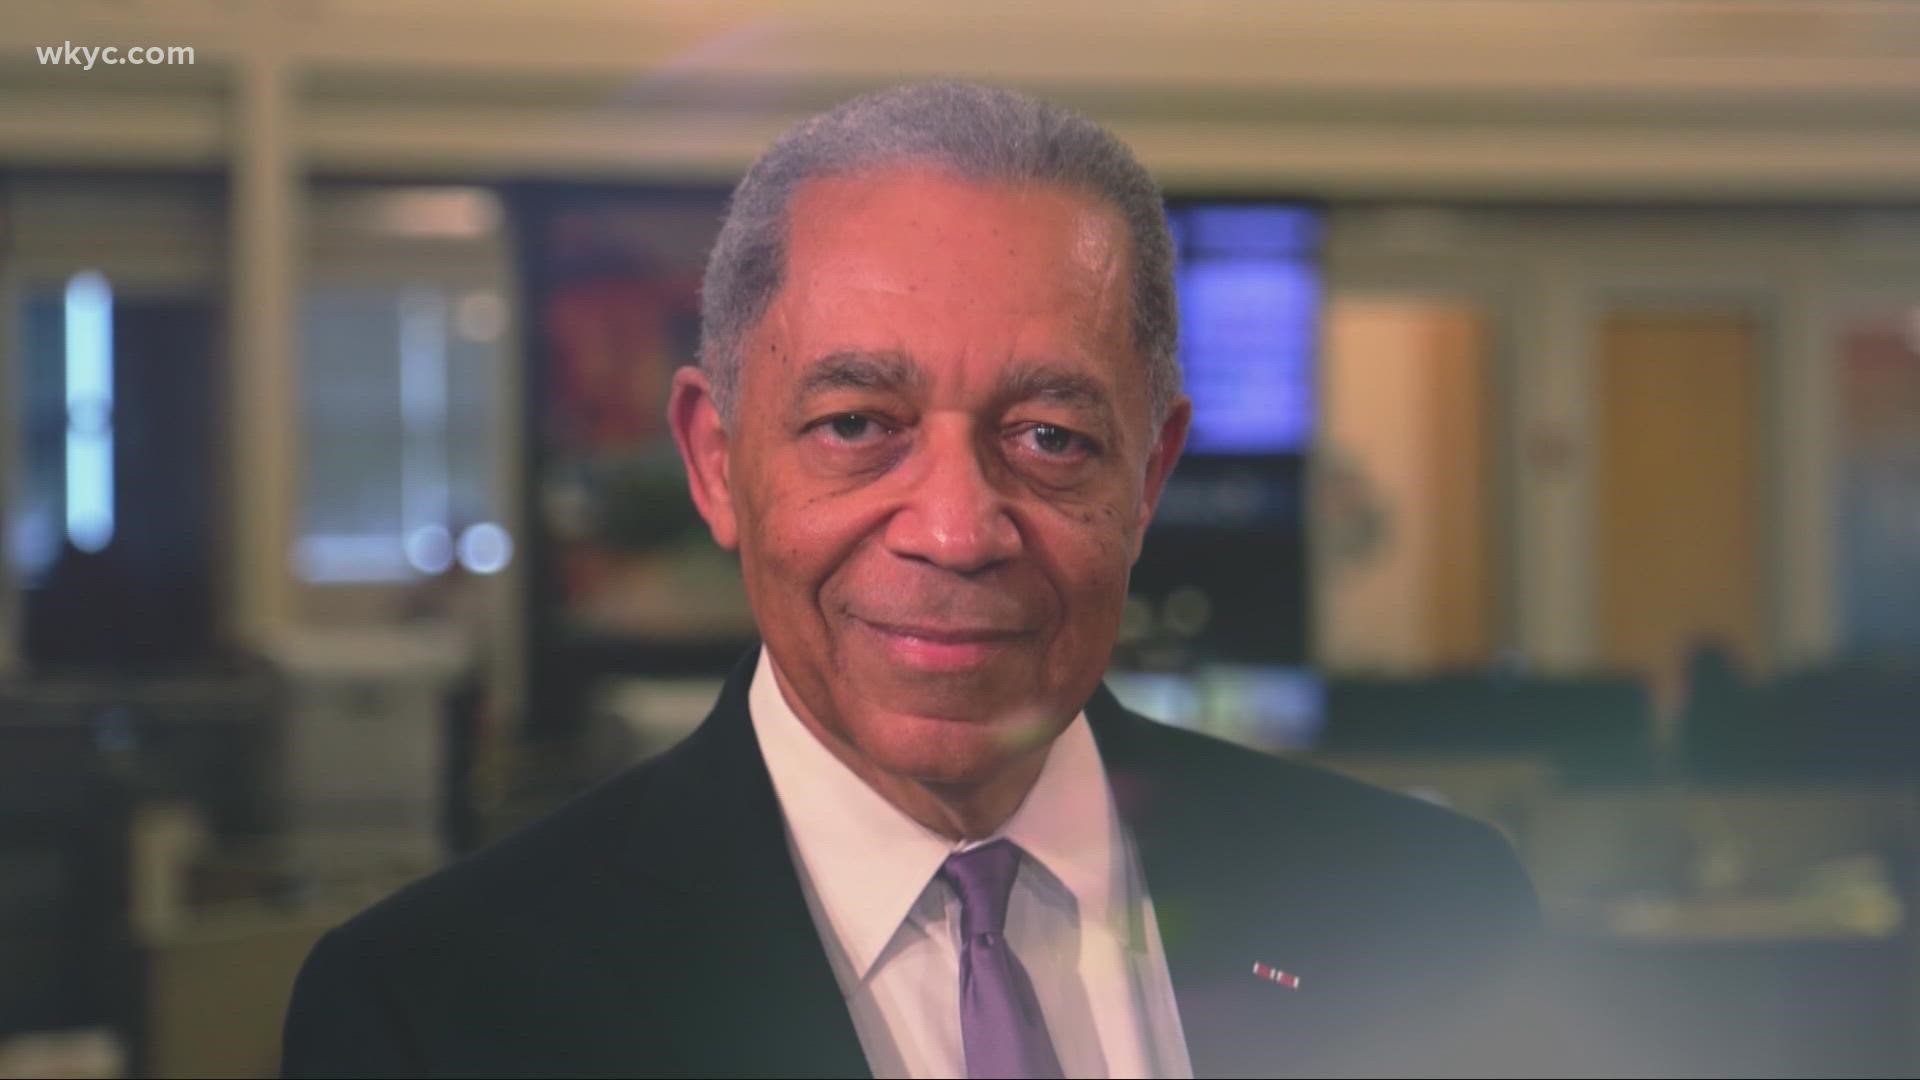 He is a war veteran, a storyteller and a legend in the field of journalism. Today we honor one of our own as we spotlight 3News’ Leon Bibb for Black History Month.